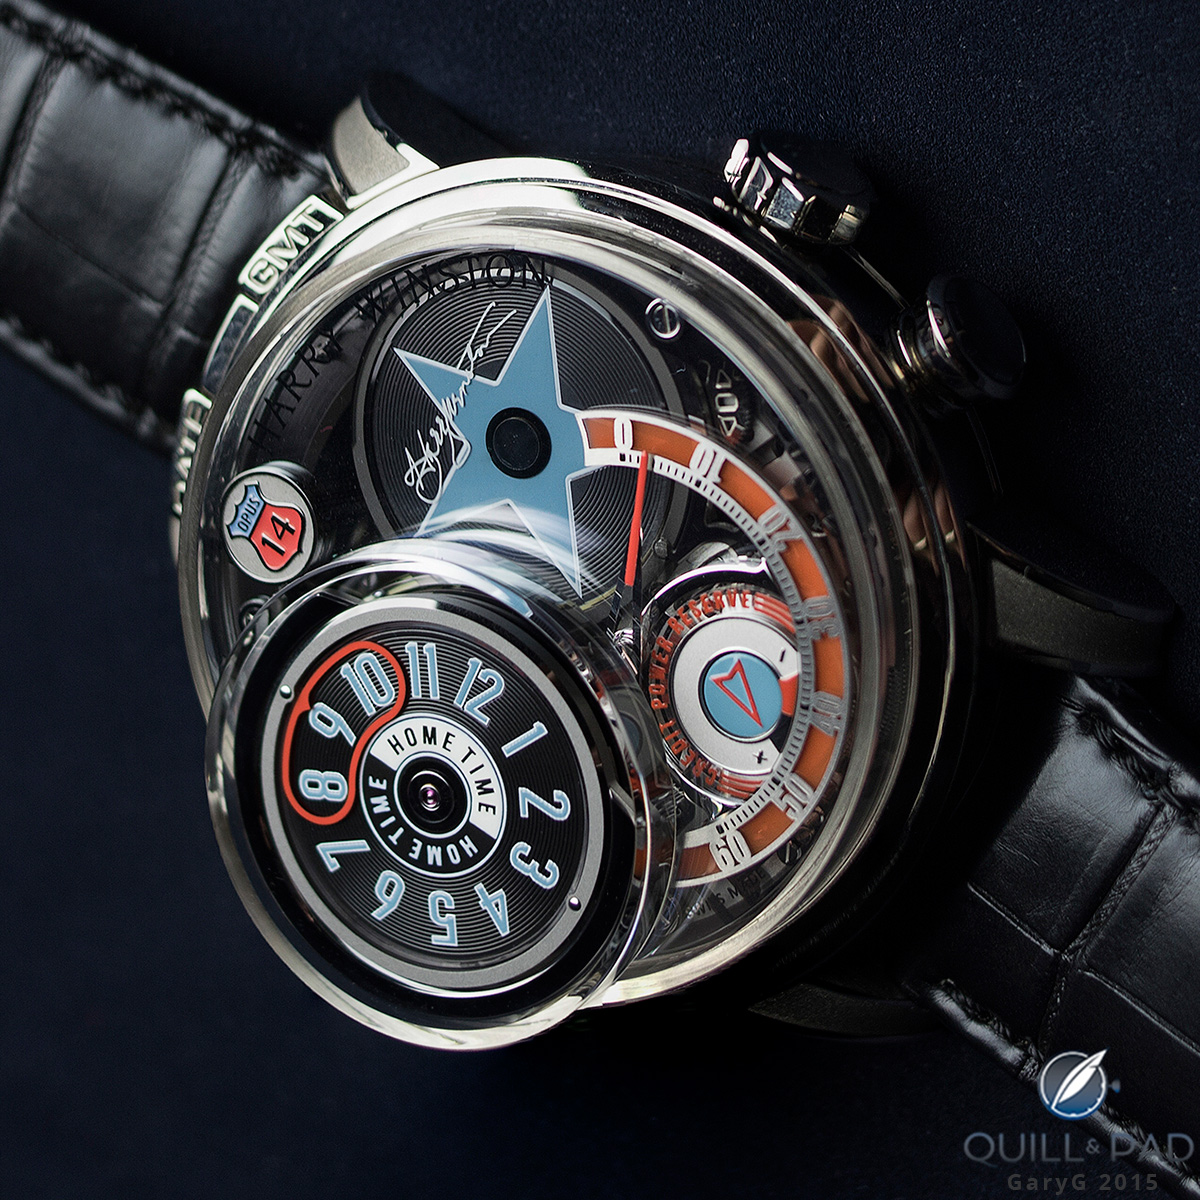 The Harry Winston Opus 14 showing its customizable aesthetic disc